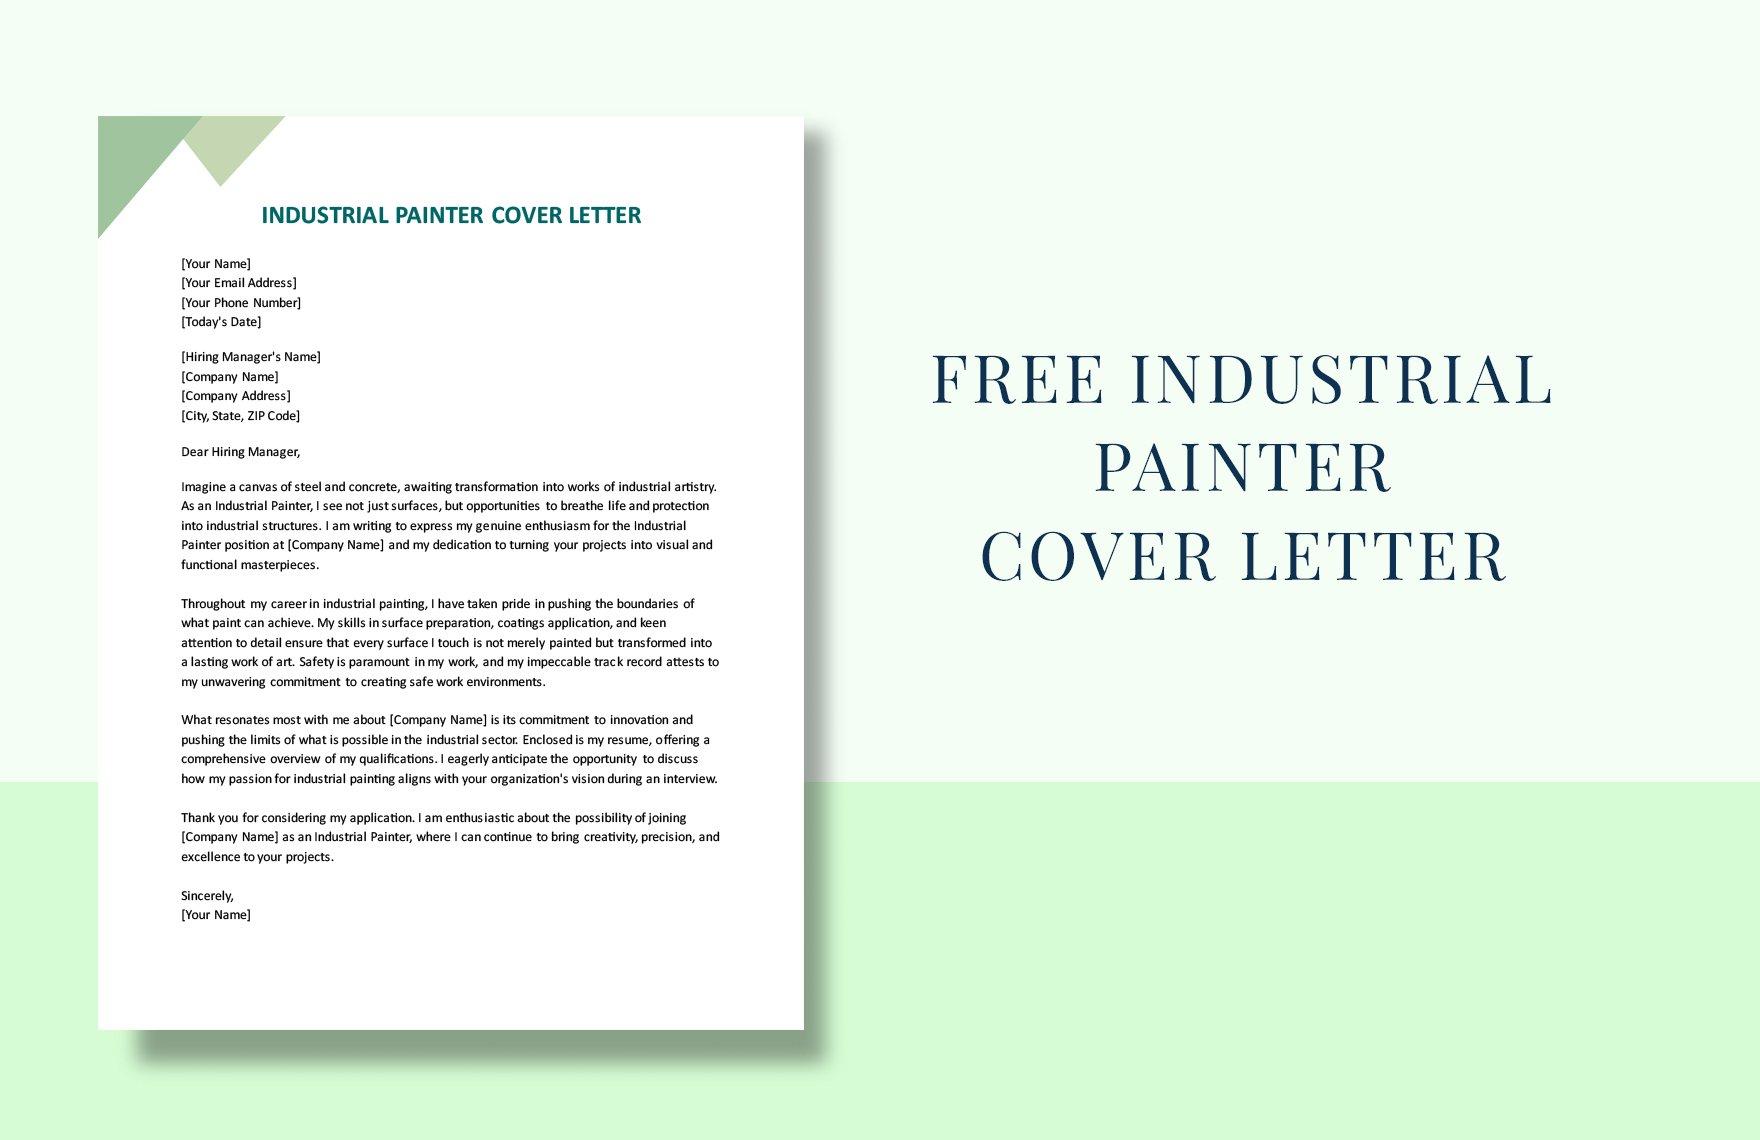 Industrial Painter Cover Letter